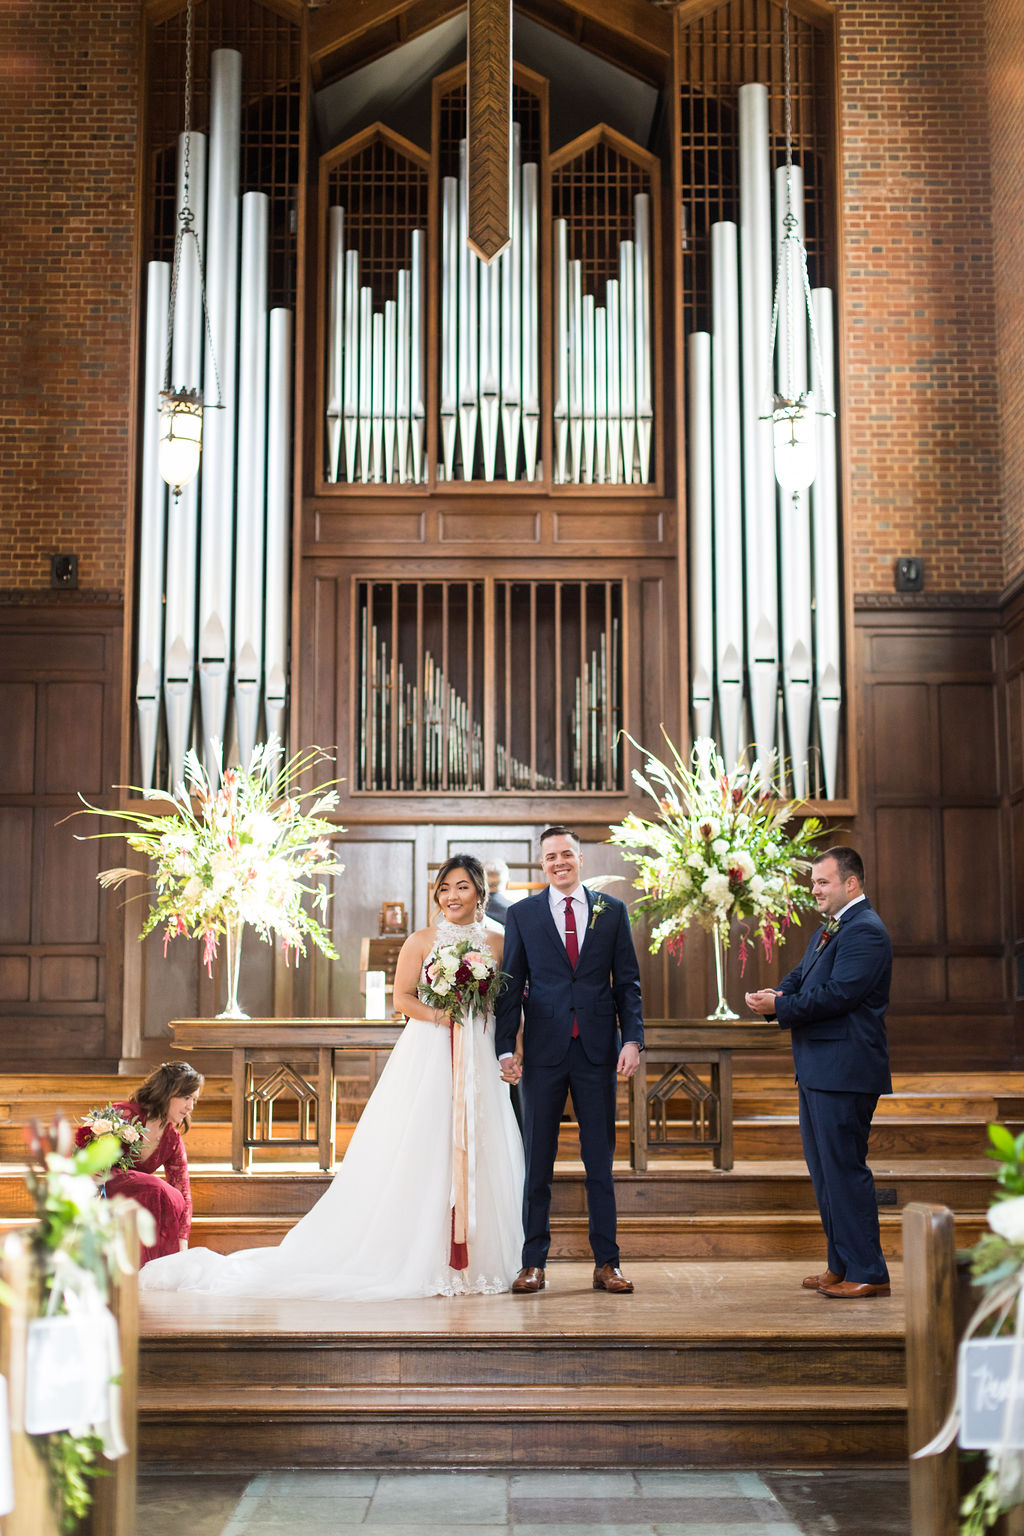 Couple standard at the altar in Wightman, smiling toward guests